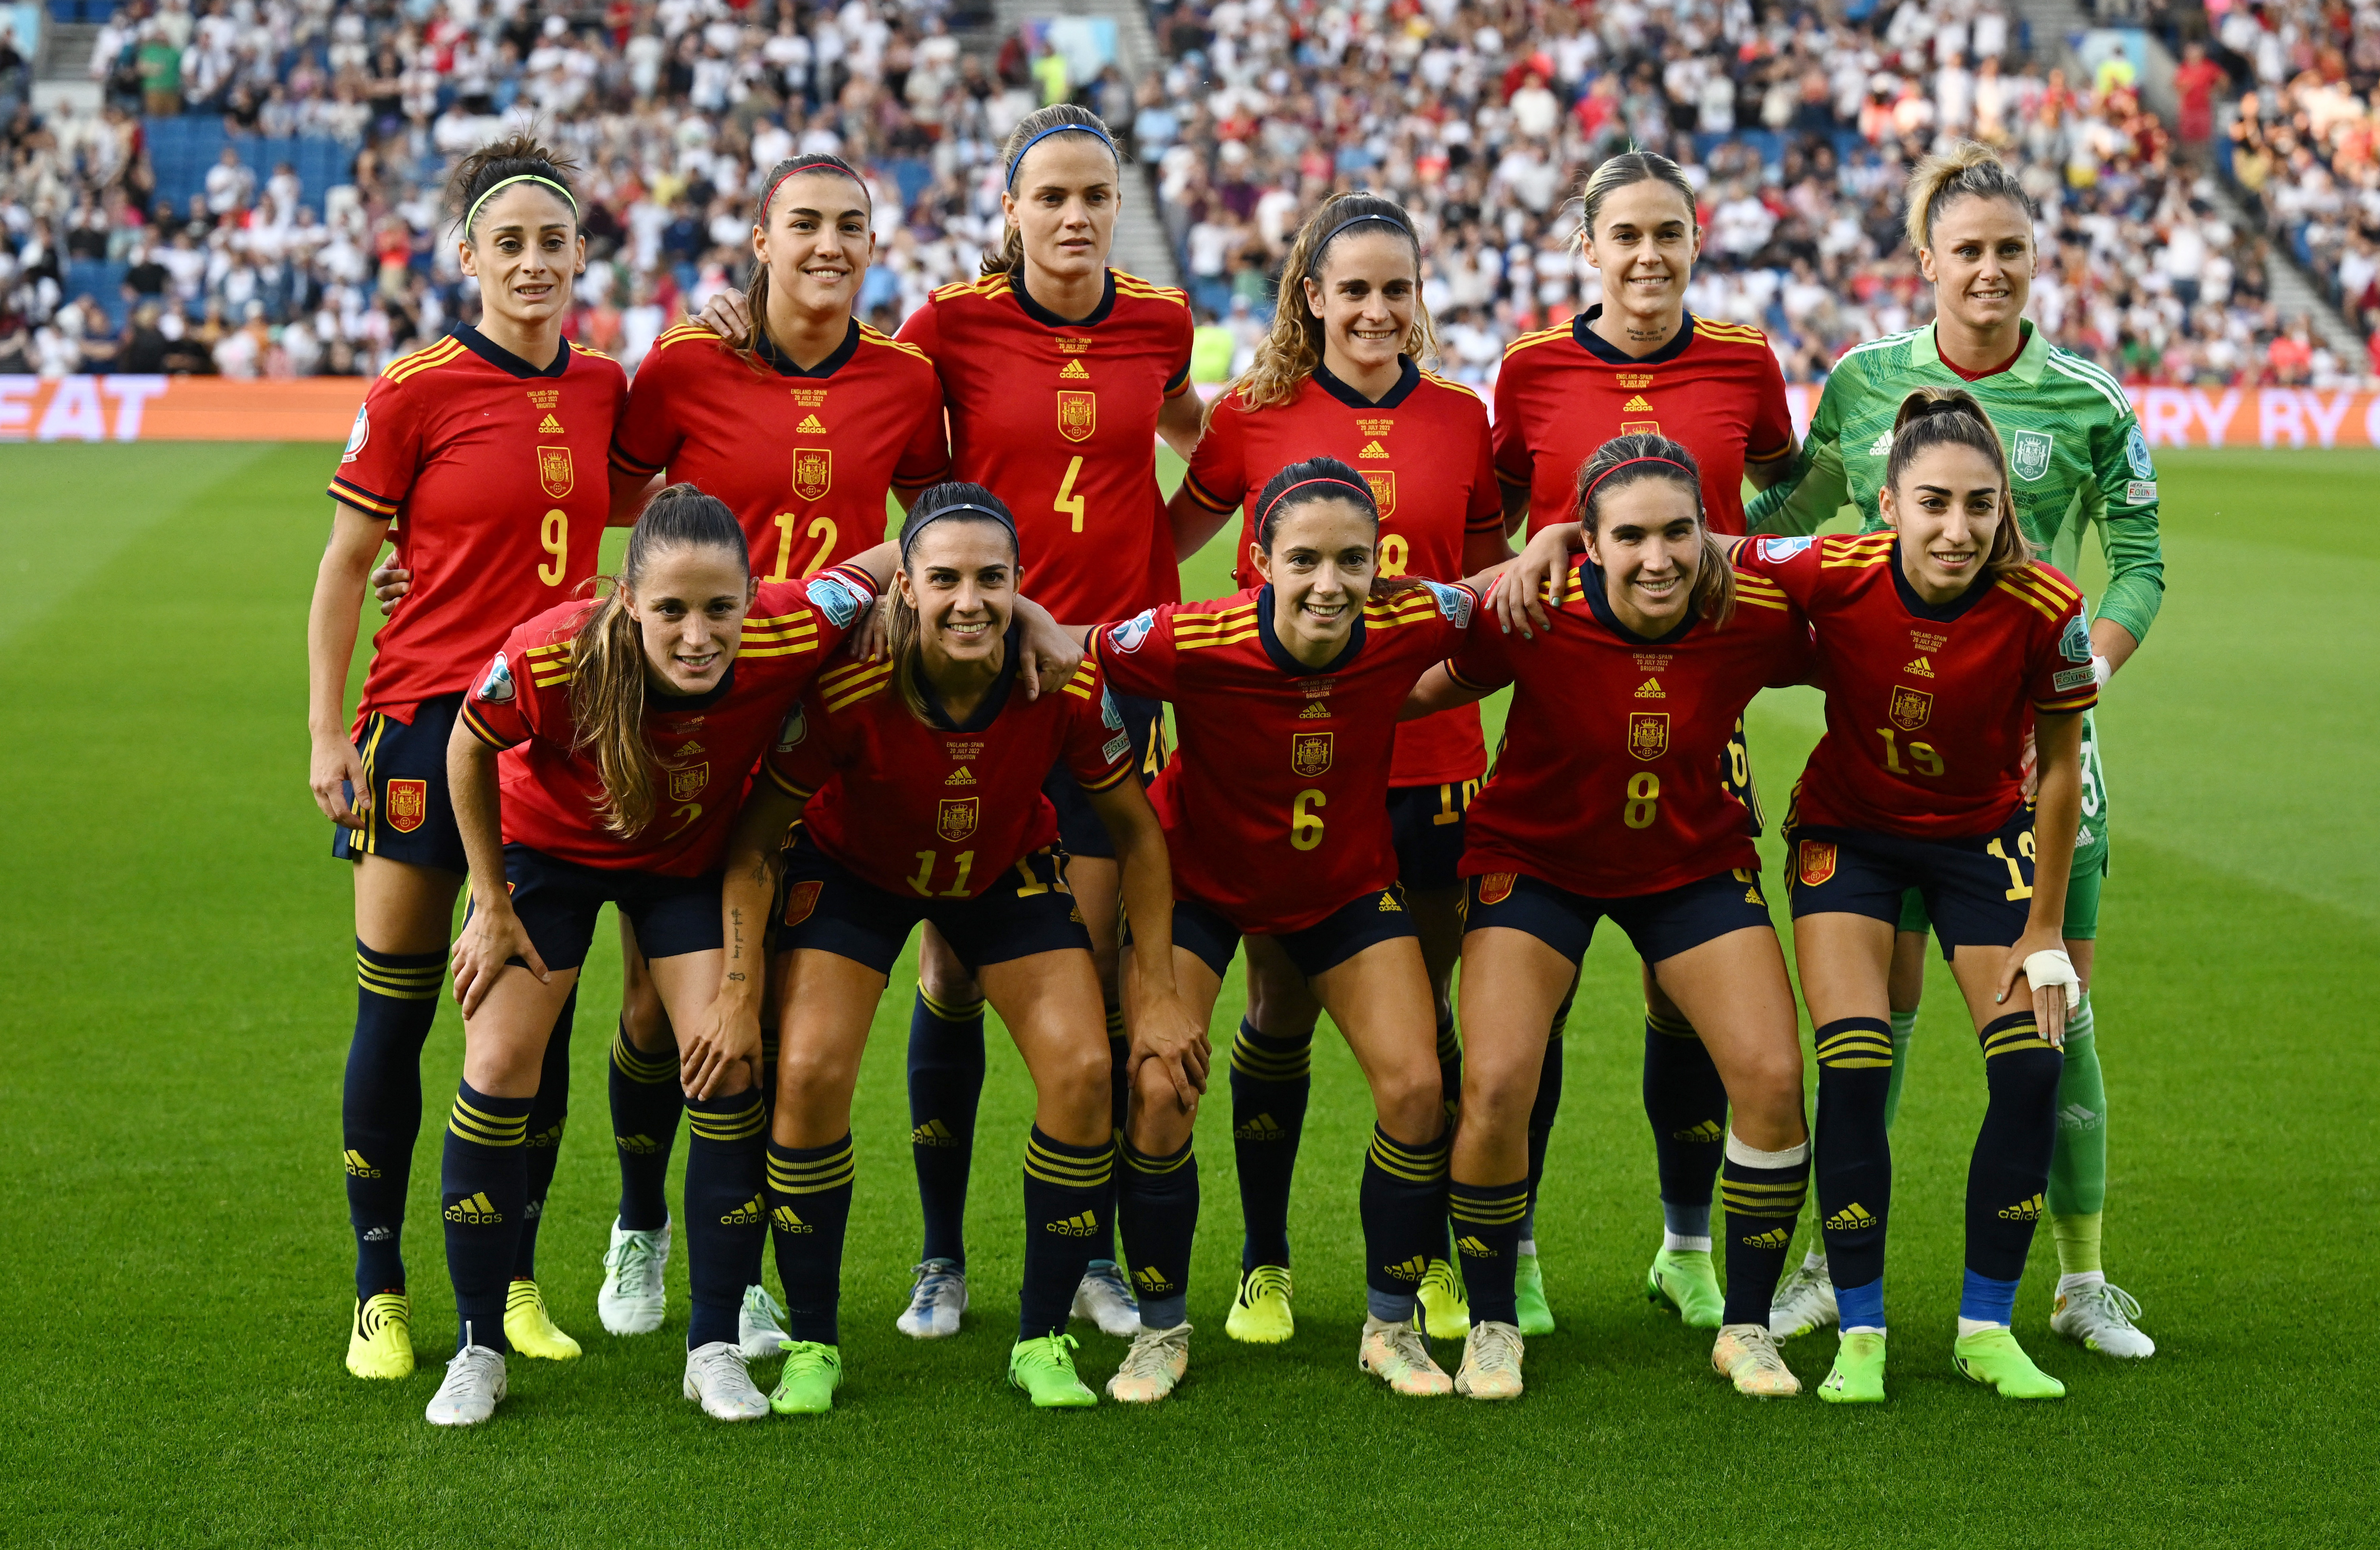 Spain expanding from 6 to 15 teams in top league